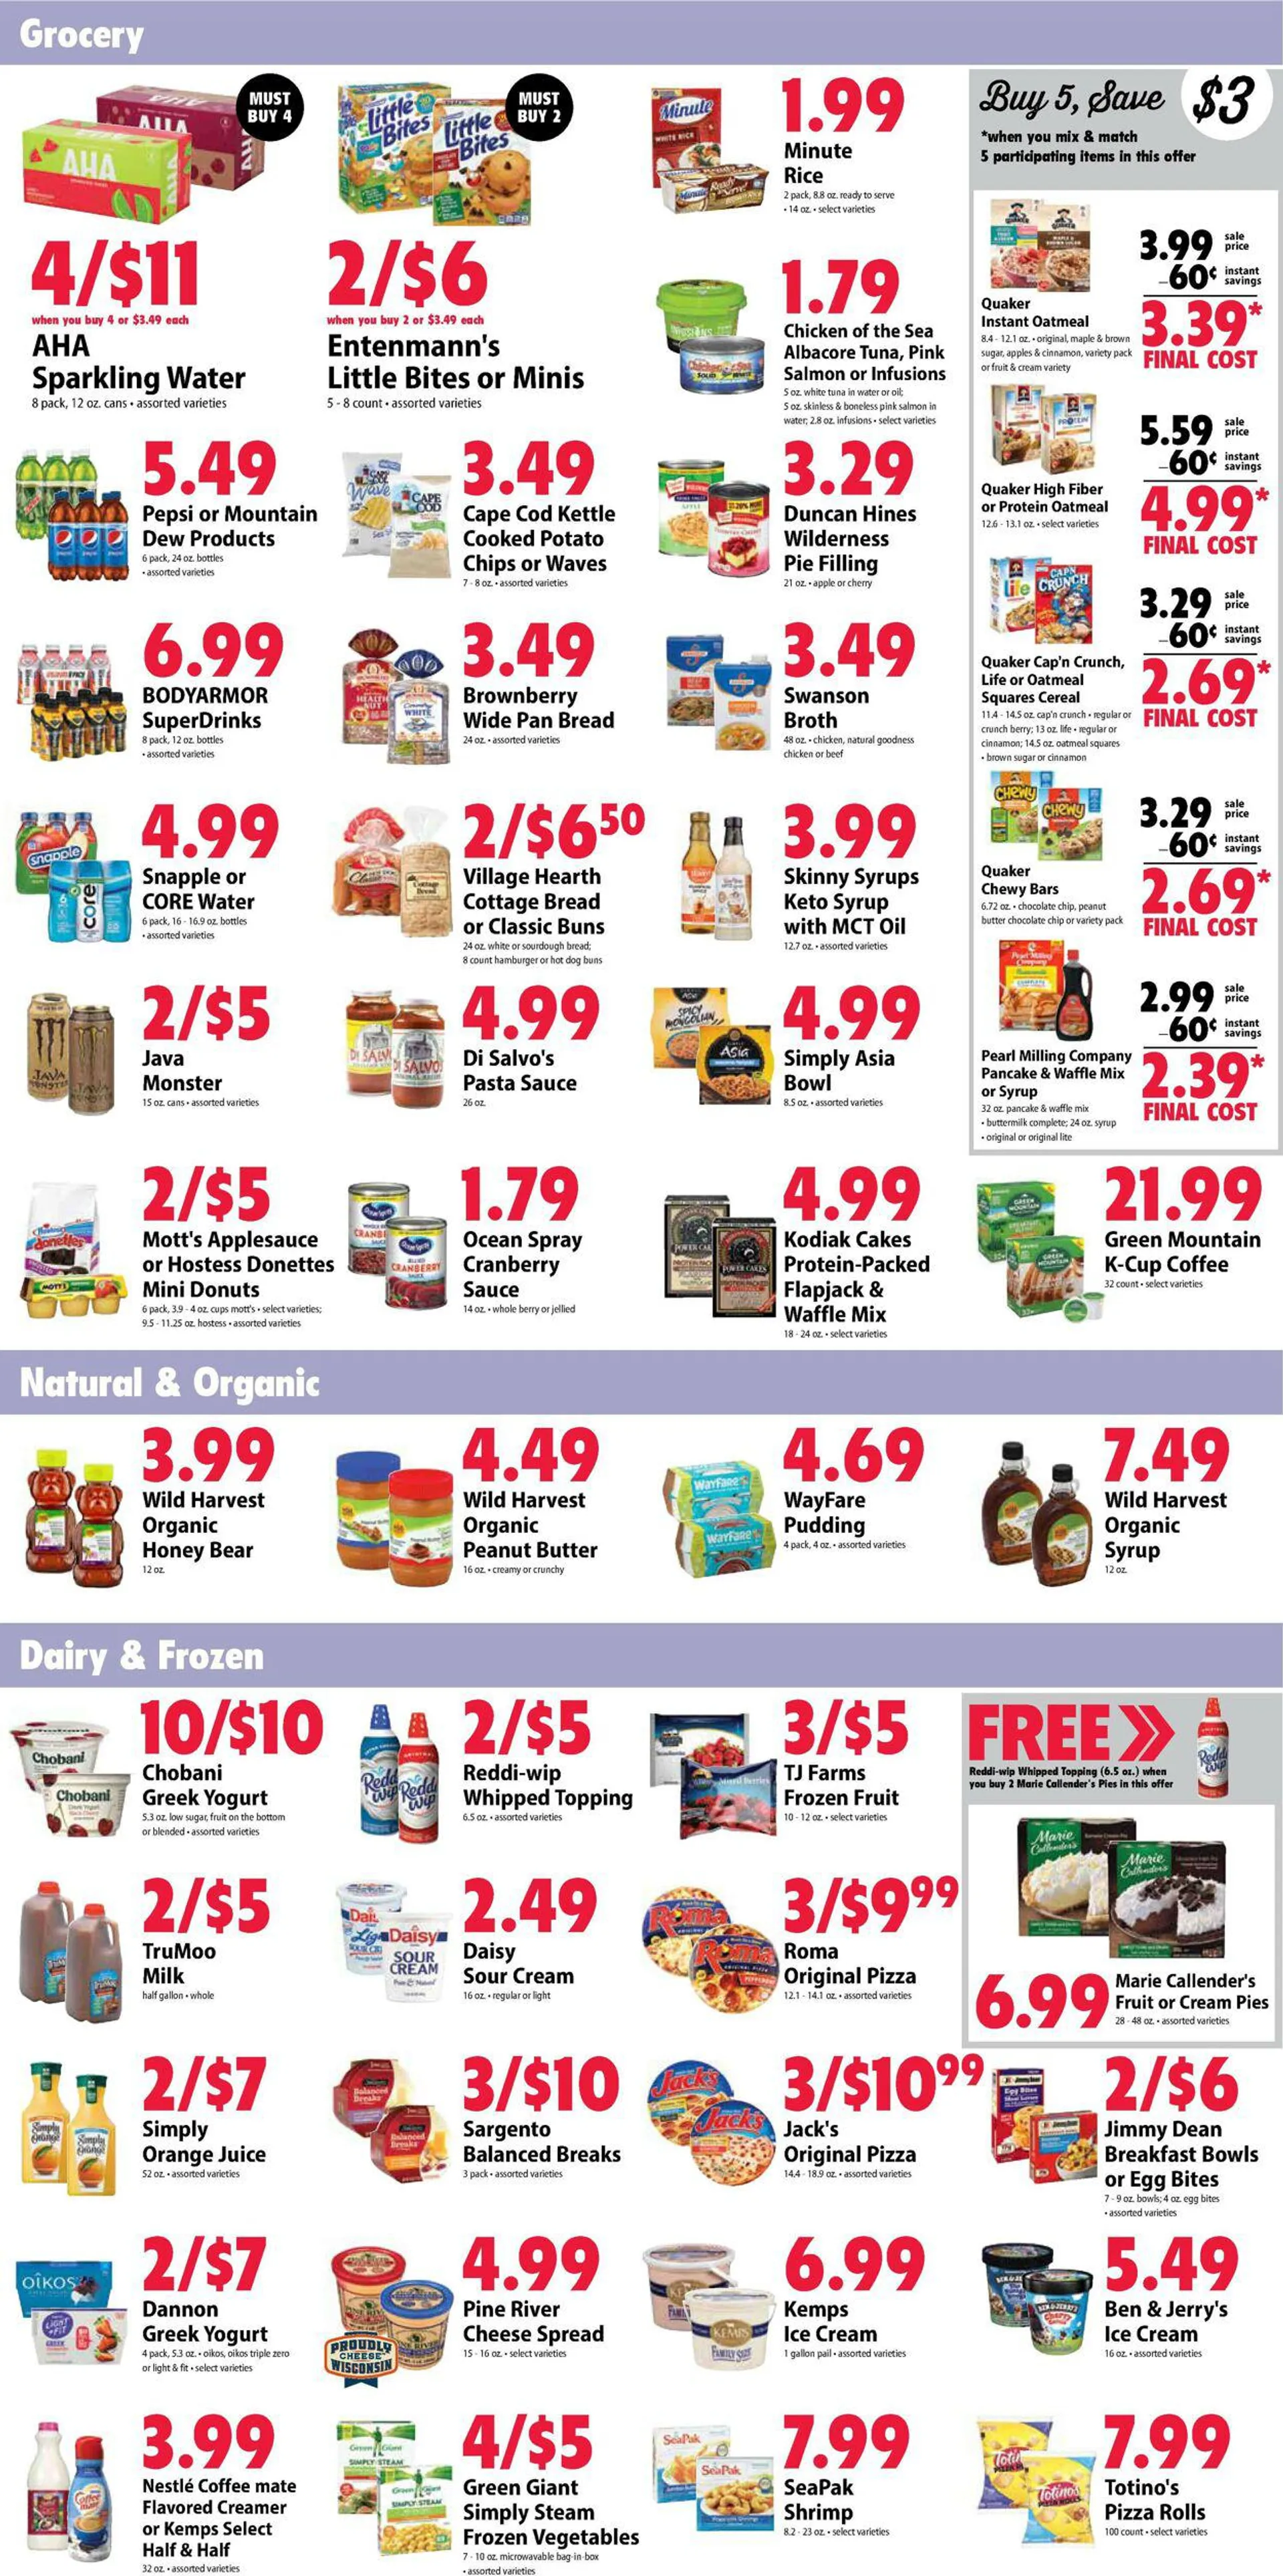 Festival Foods Current weekly ad - 3